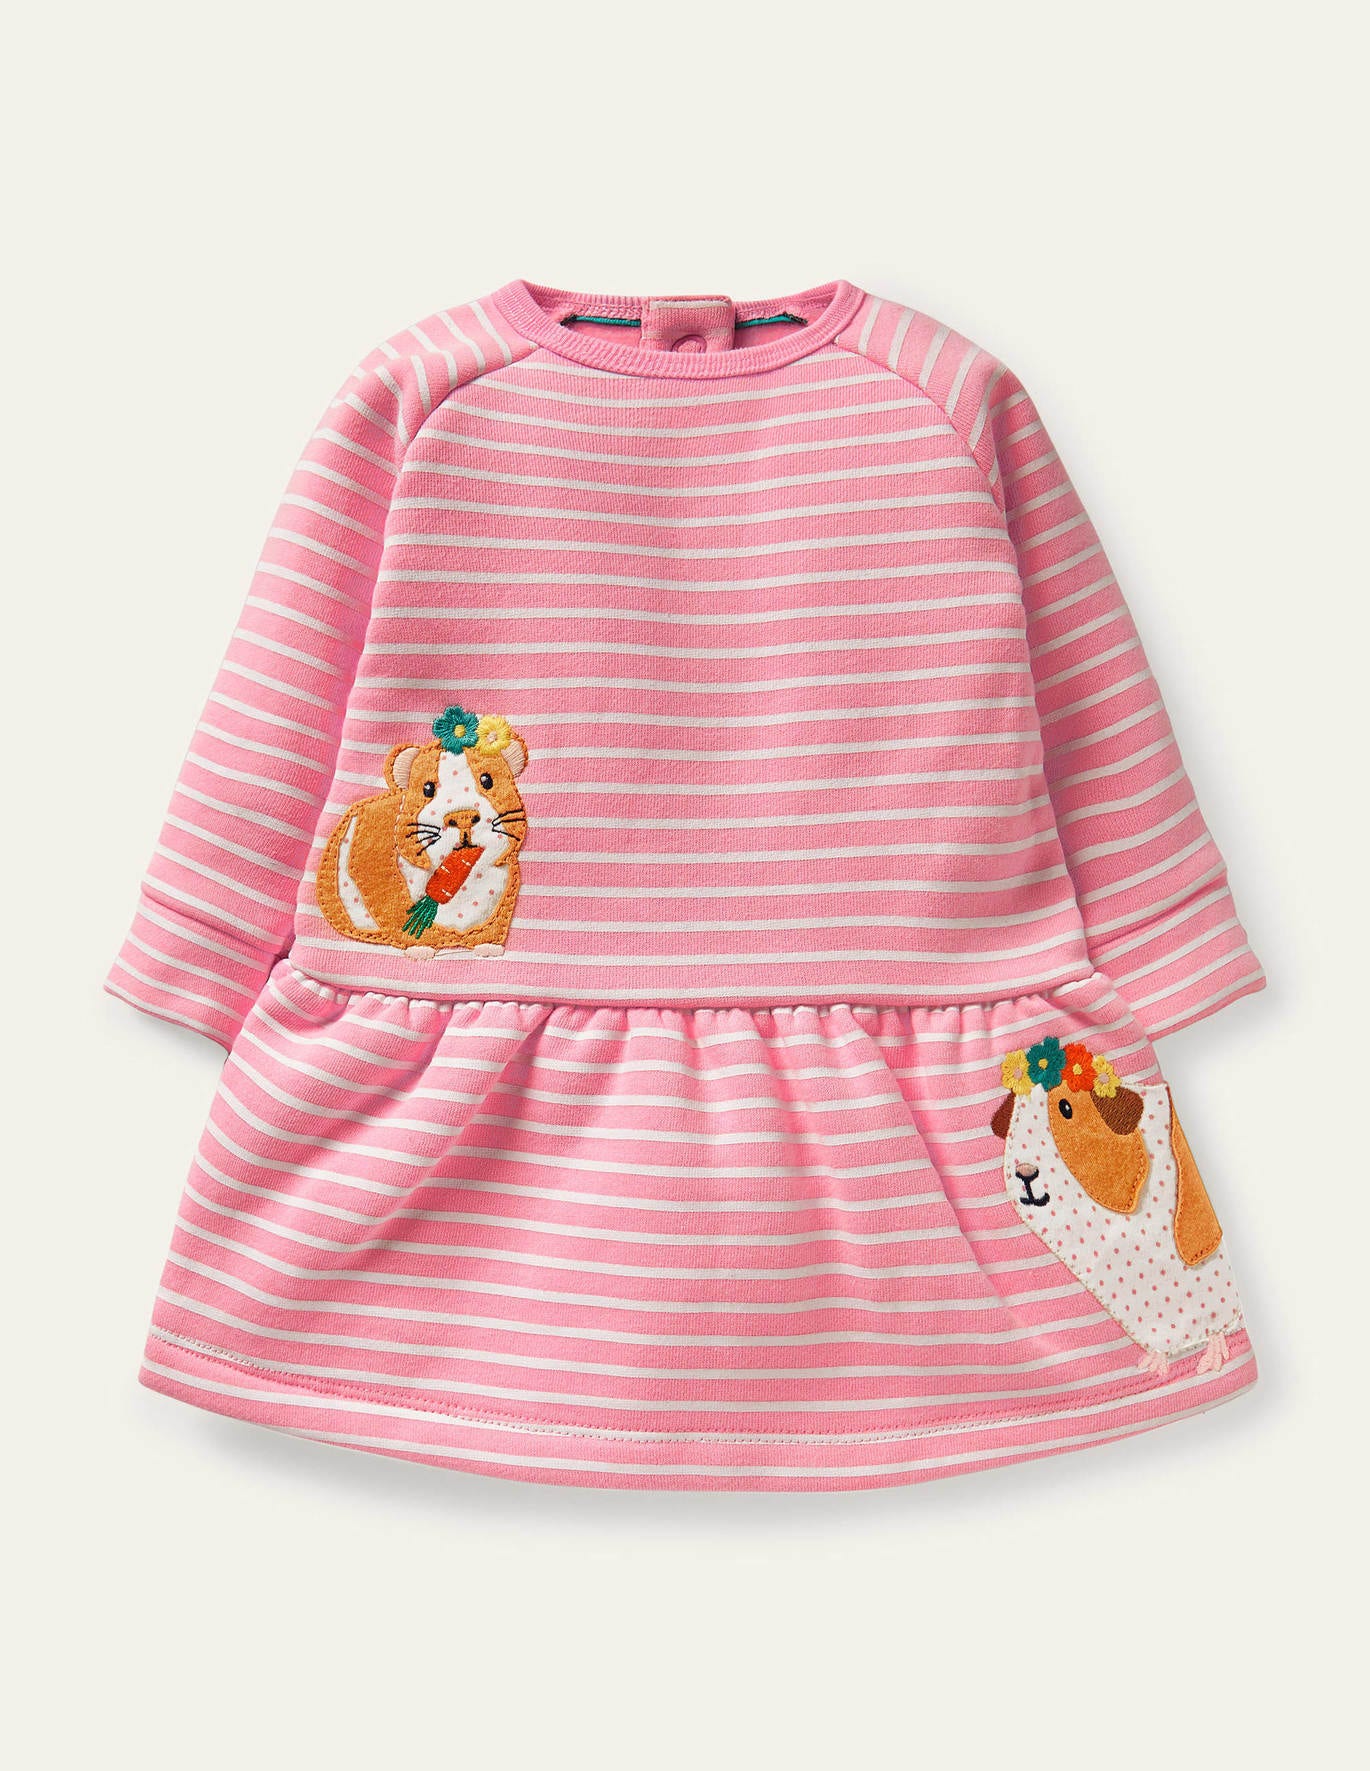 Boden Cosy Sweatshirt Dress - Formica Pink/Ivory Guinea Pigs